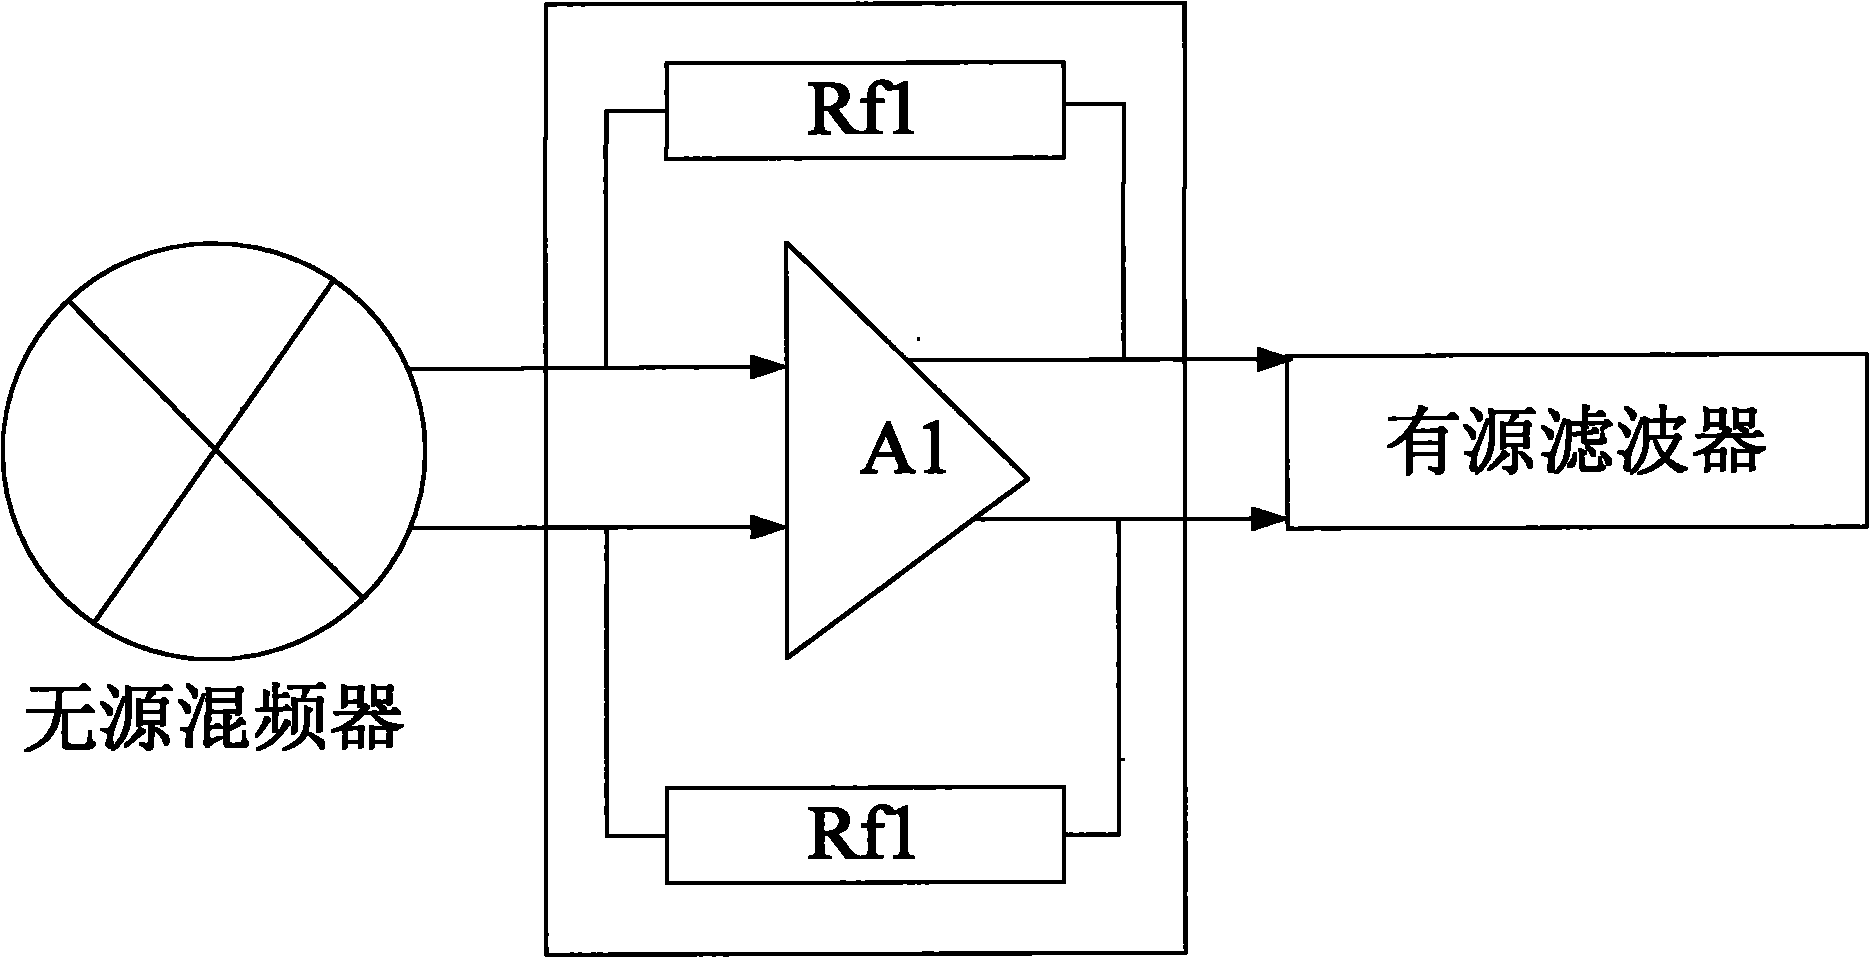 Coupled structure of passive mixer and active filter and receiver